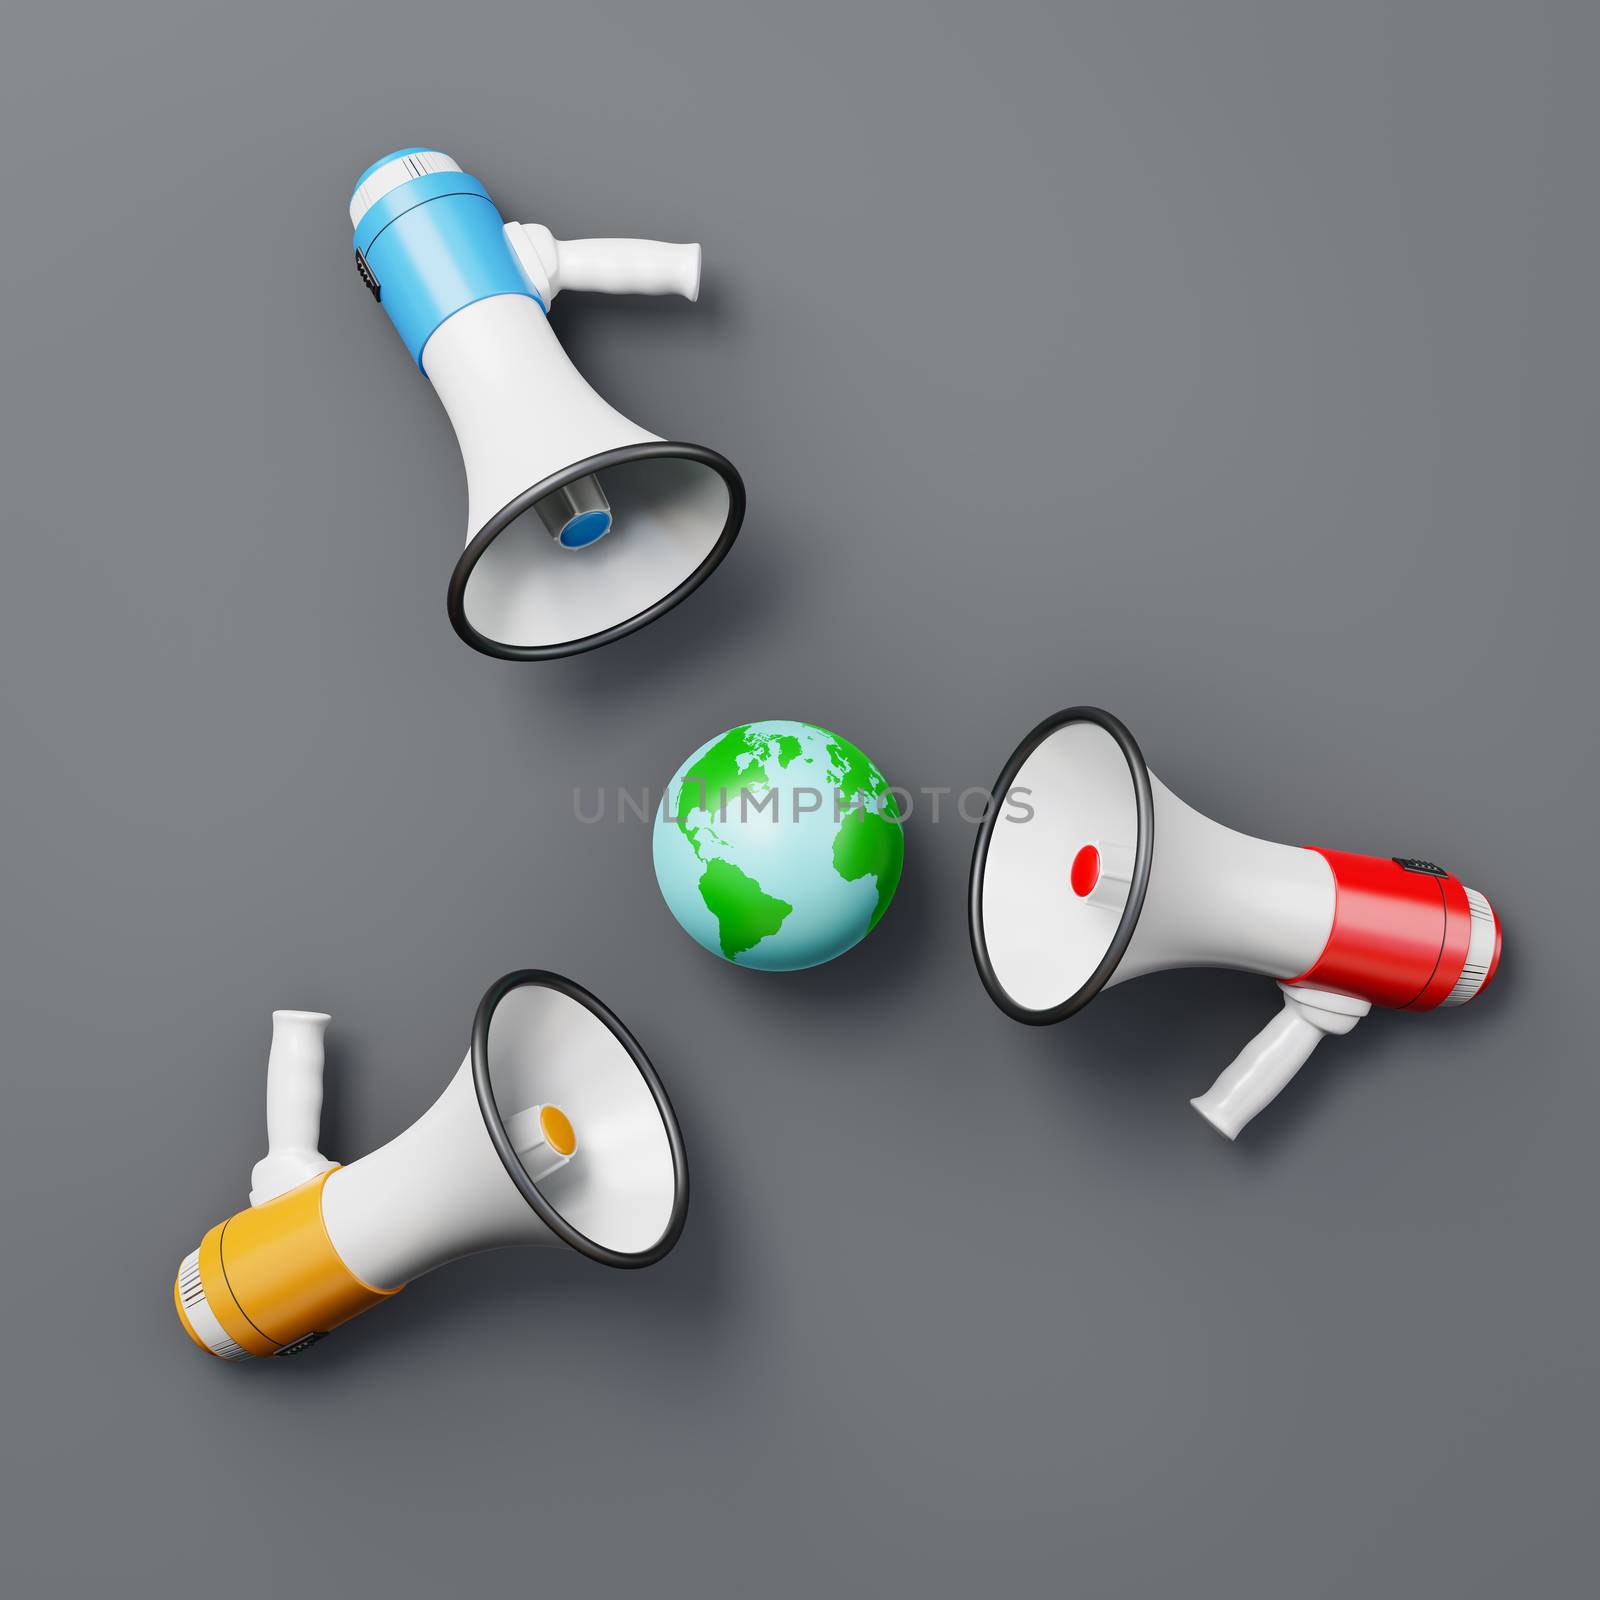 Red, Blue and Yellow Megaphones around the World on Dark Gray Background 3D Illustration, Propaganda Concept